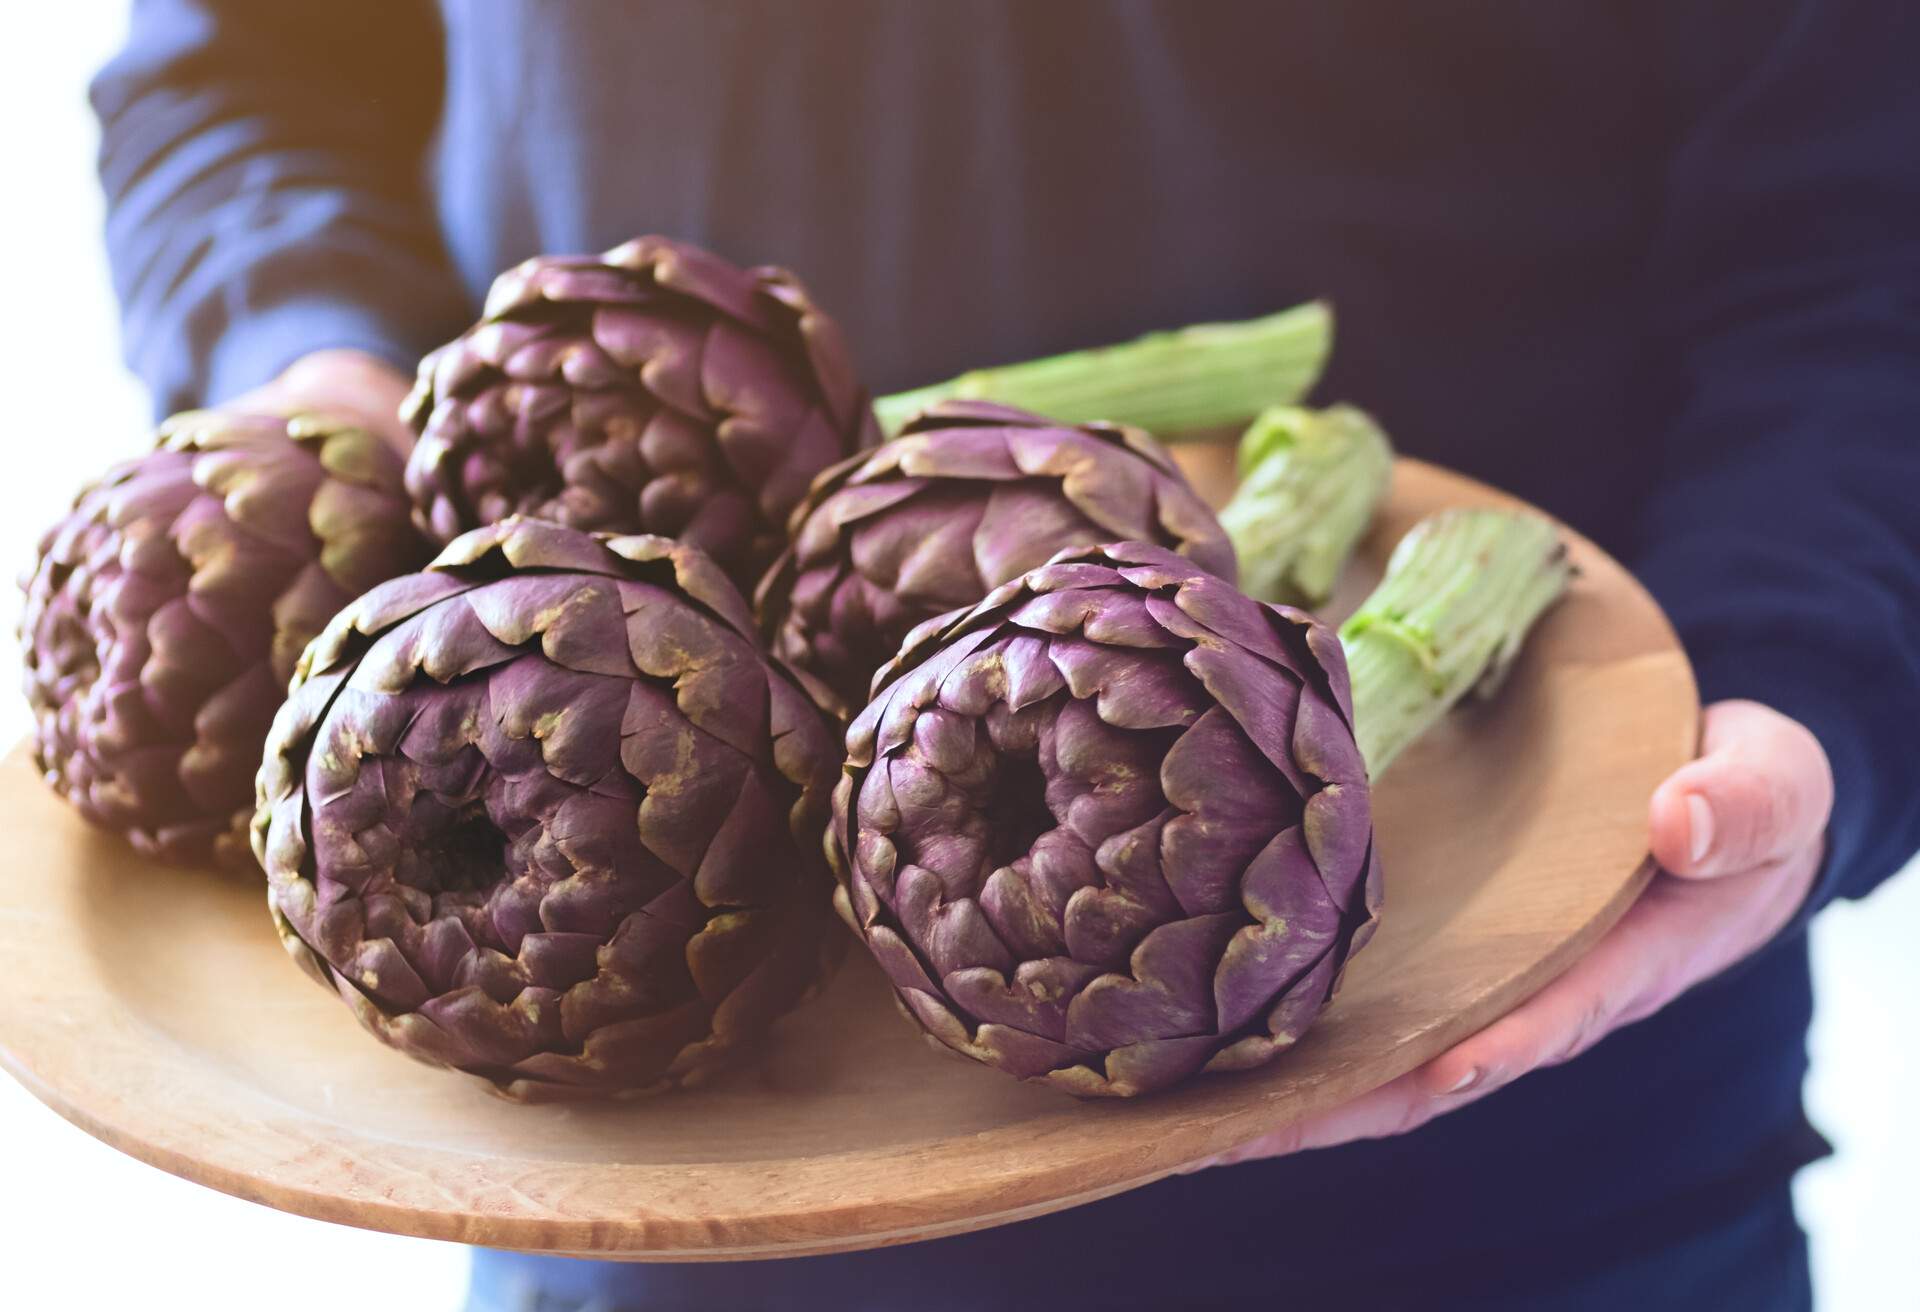 Artichokes. The man is holding a plate with fresh artichokes. Ingredients of southern Italian cuisine 